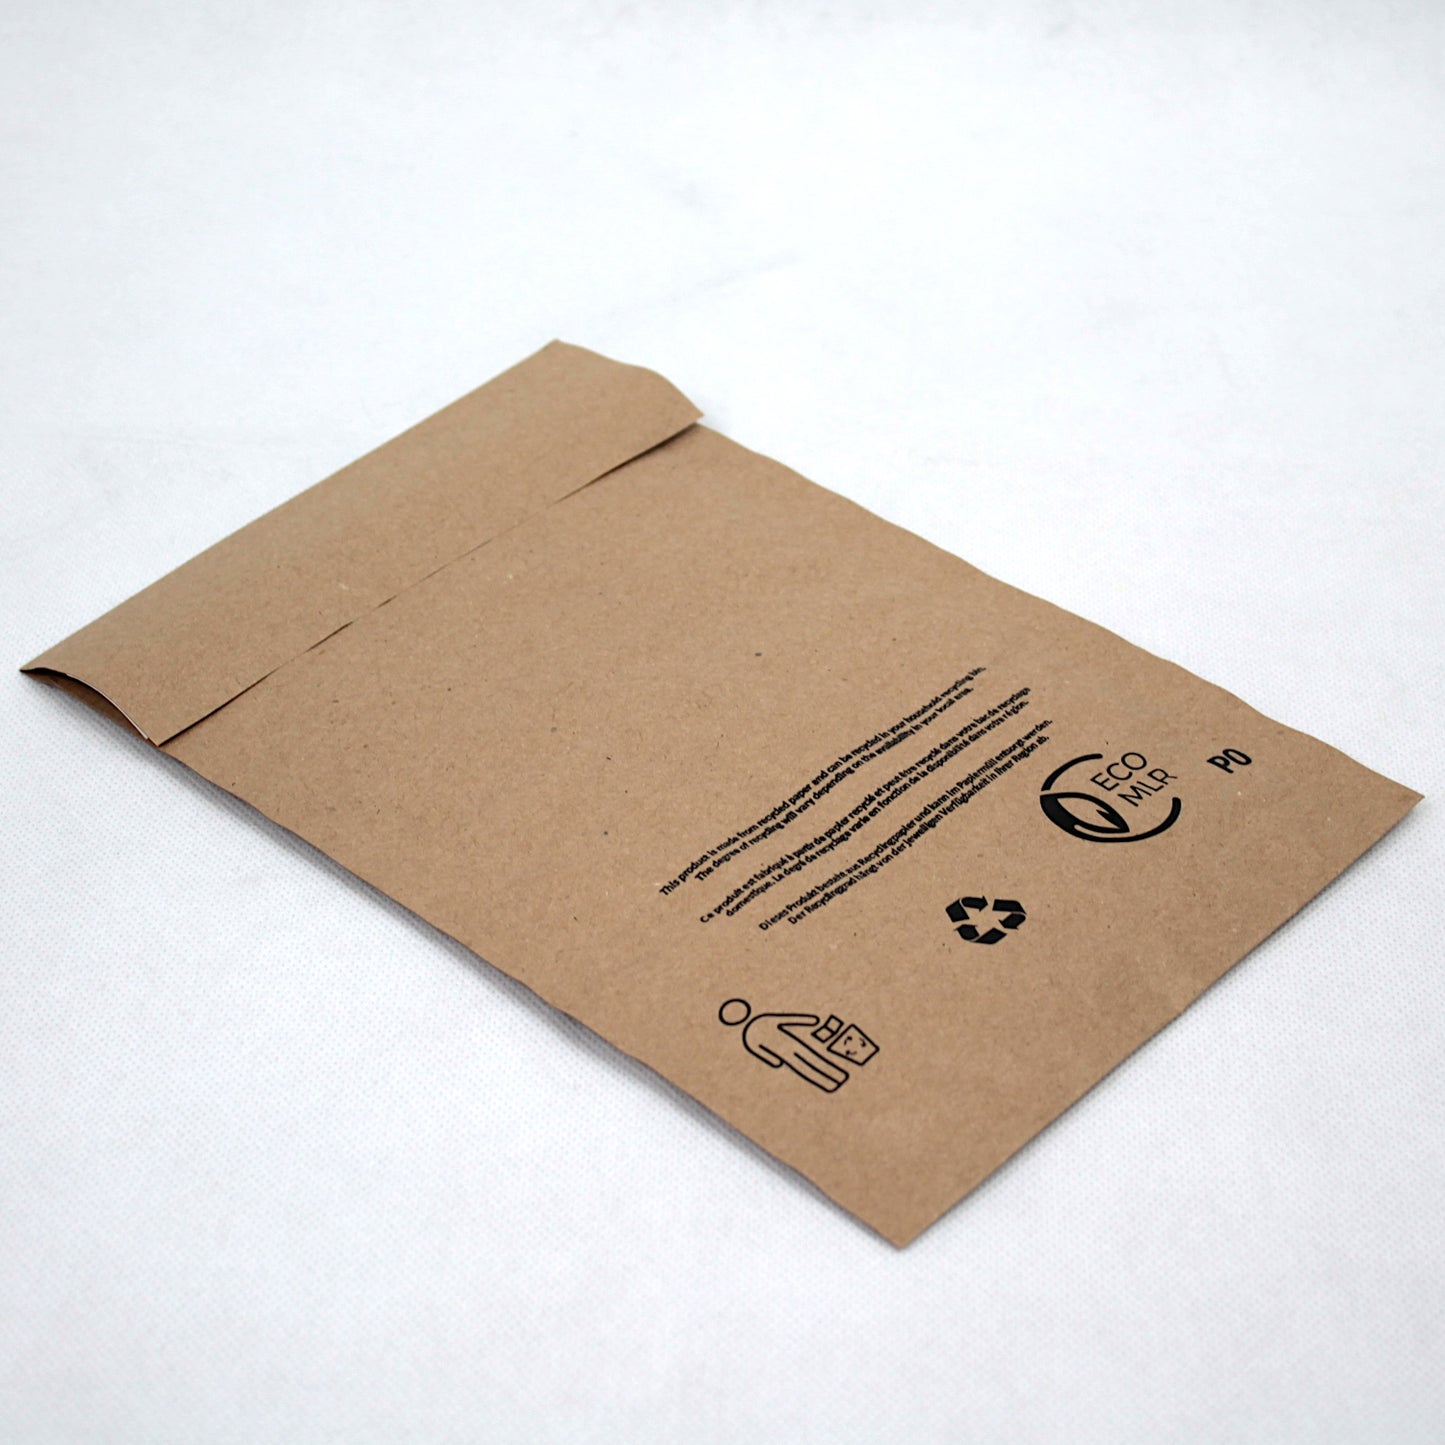 225x130mm Recyclable Padded Envelopes - Pack of 100